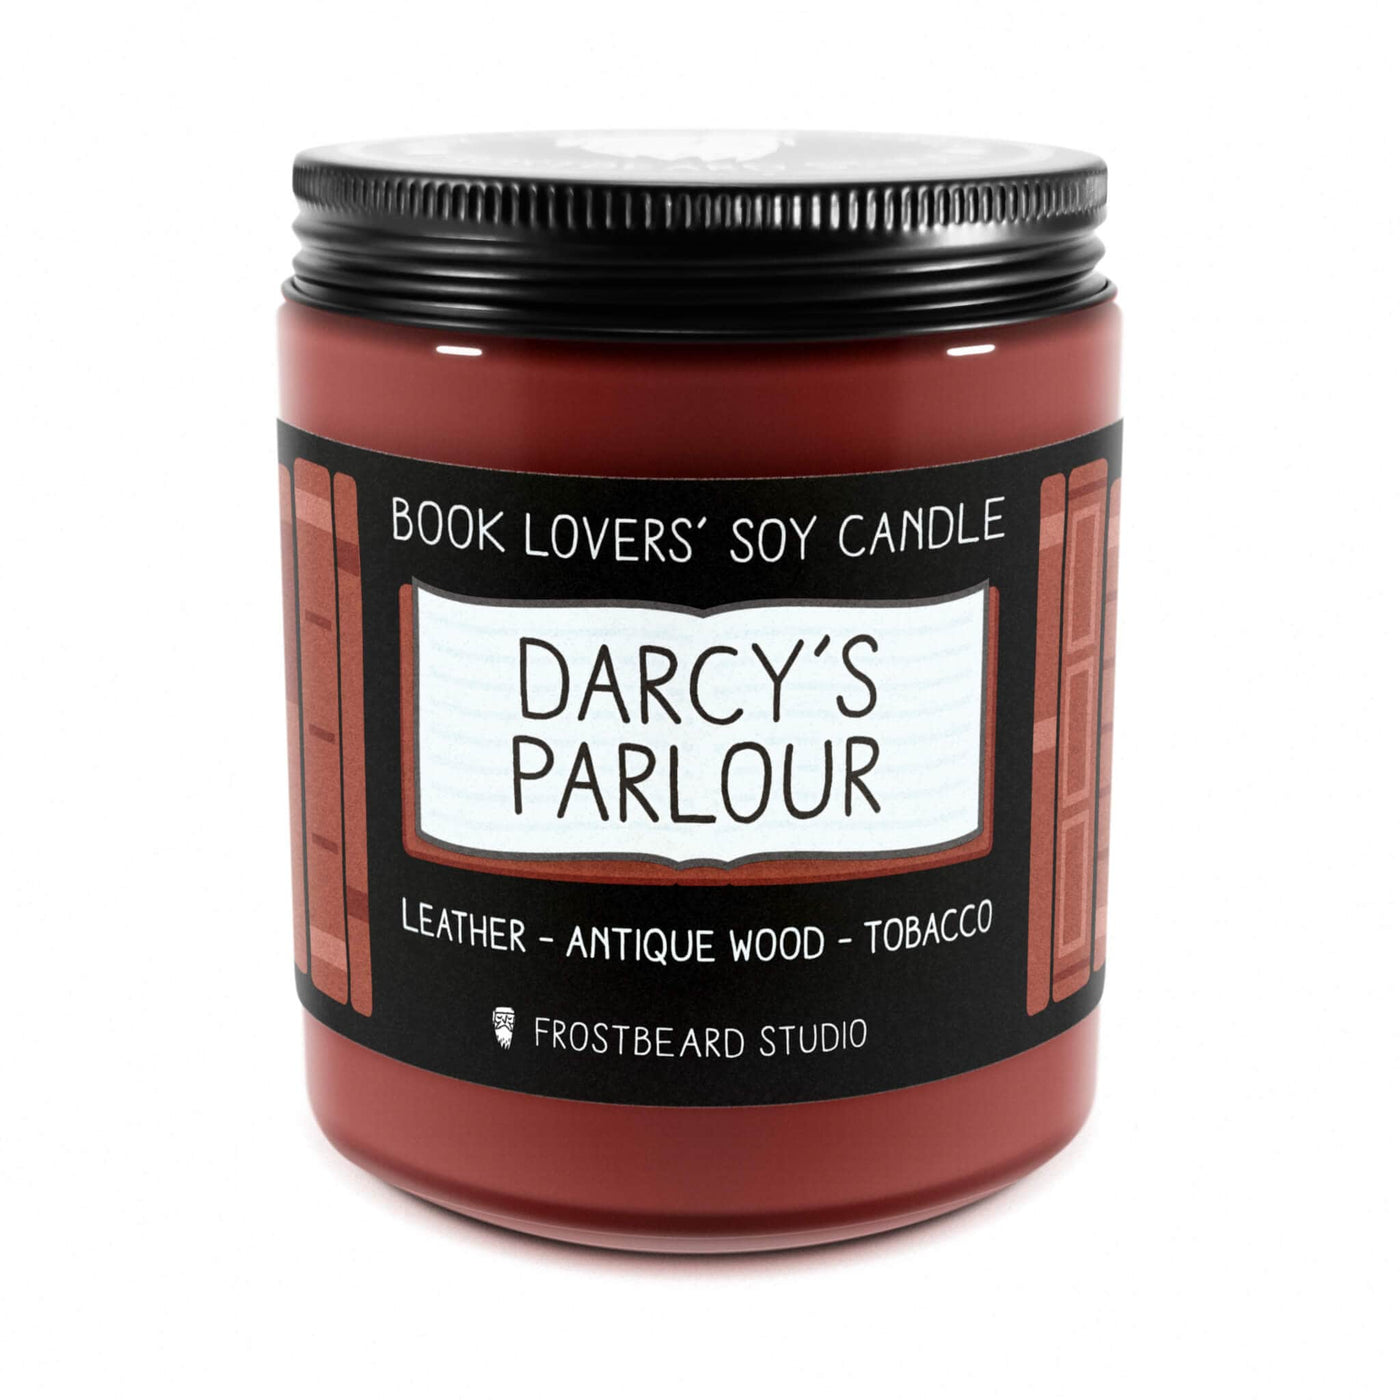 Darcy's Parlour  -  8 oz Jar  -  Book Lovers' Soy Candle  -  Frostbeard Studio